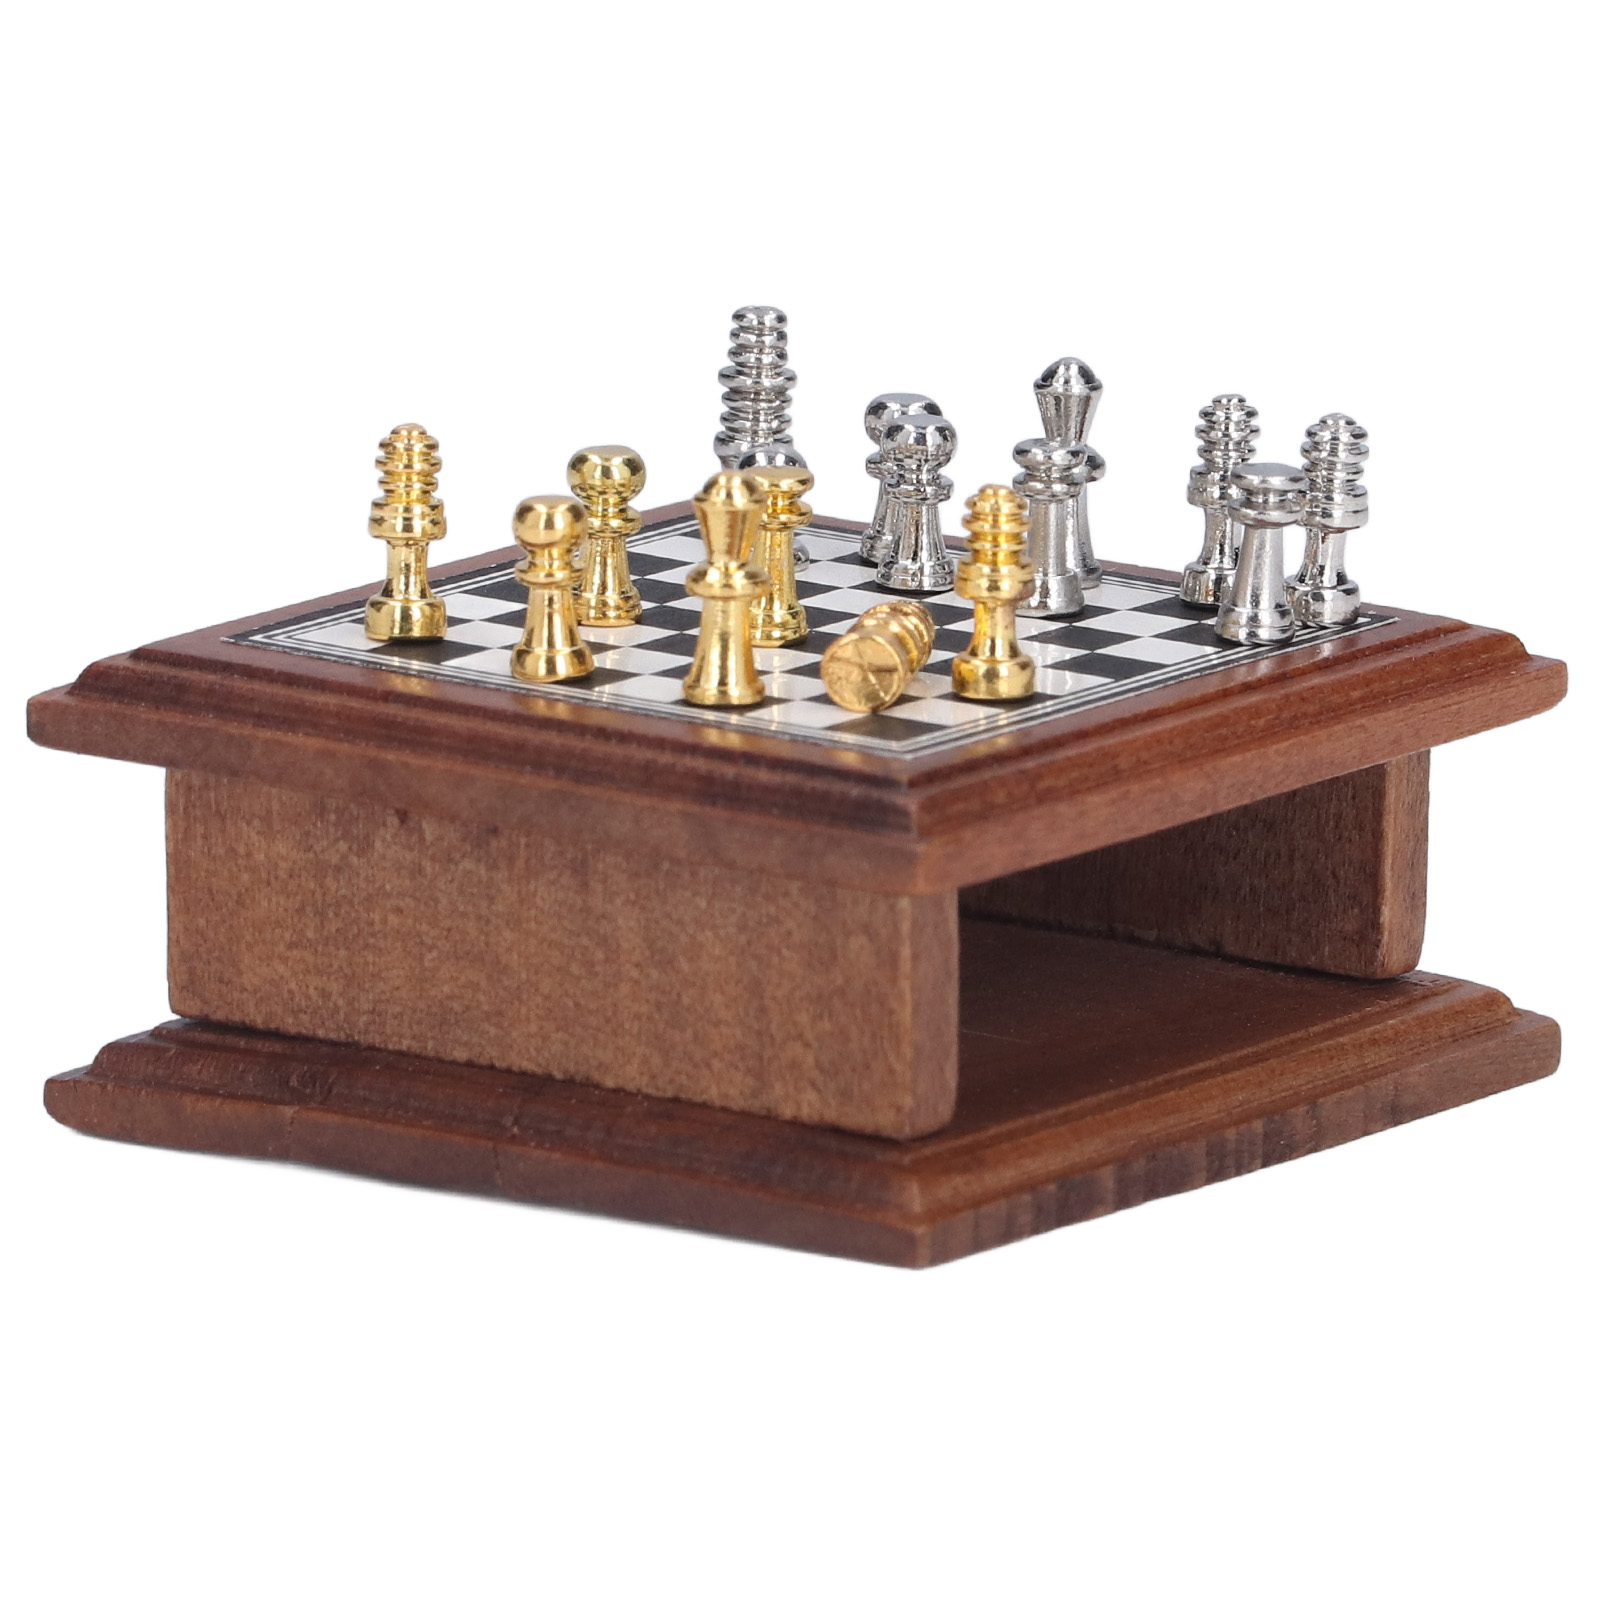 Ymiko Miniature Chess Set 1:12 Doll House Exquisite Mini Chess Set Home Decoration Gift,Chess Table Set,Chess Board Set - image 4 of 8